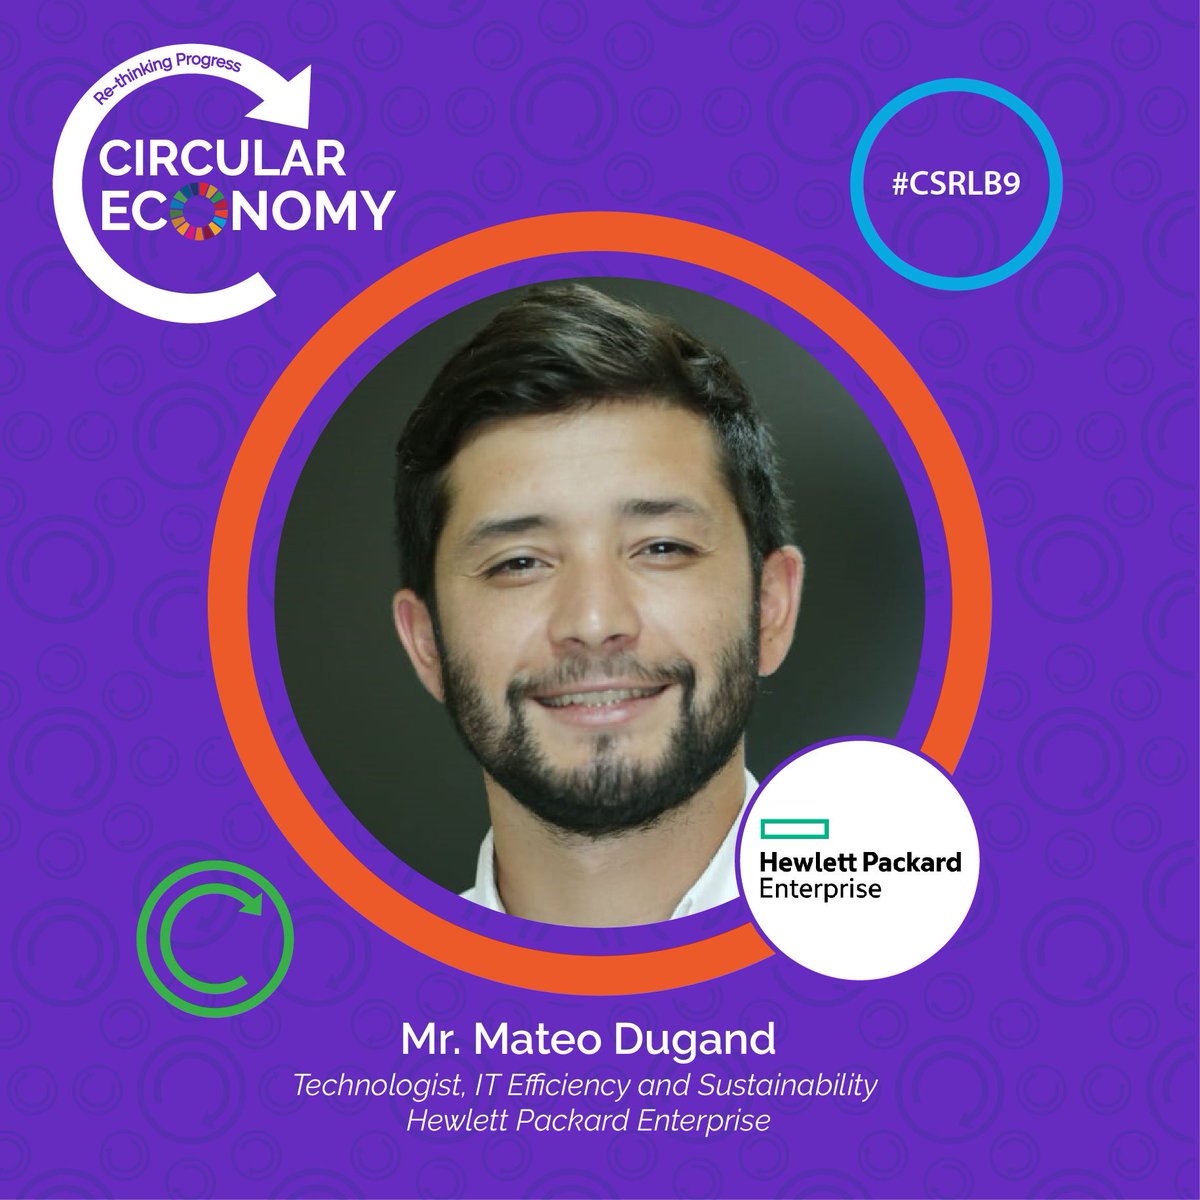 Sharing the impact of #technology and #innovation at #CSRLB9 is @DugandMateo, Technologist, #IT Efficiency and #Sustainability, @HPE. Interested in learning how technology can help advance a #circulareconomy? Register today to learn from our great panel of speakers. #Circularity